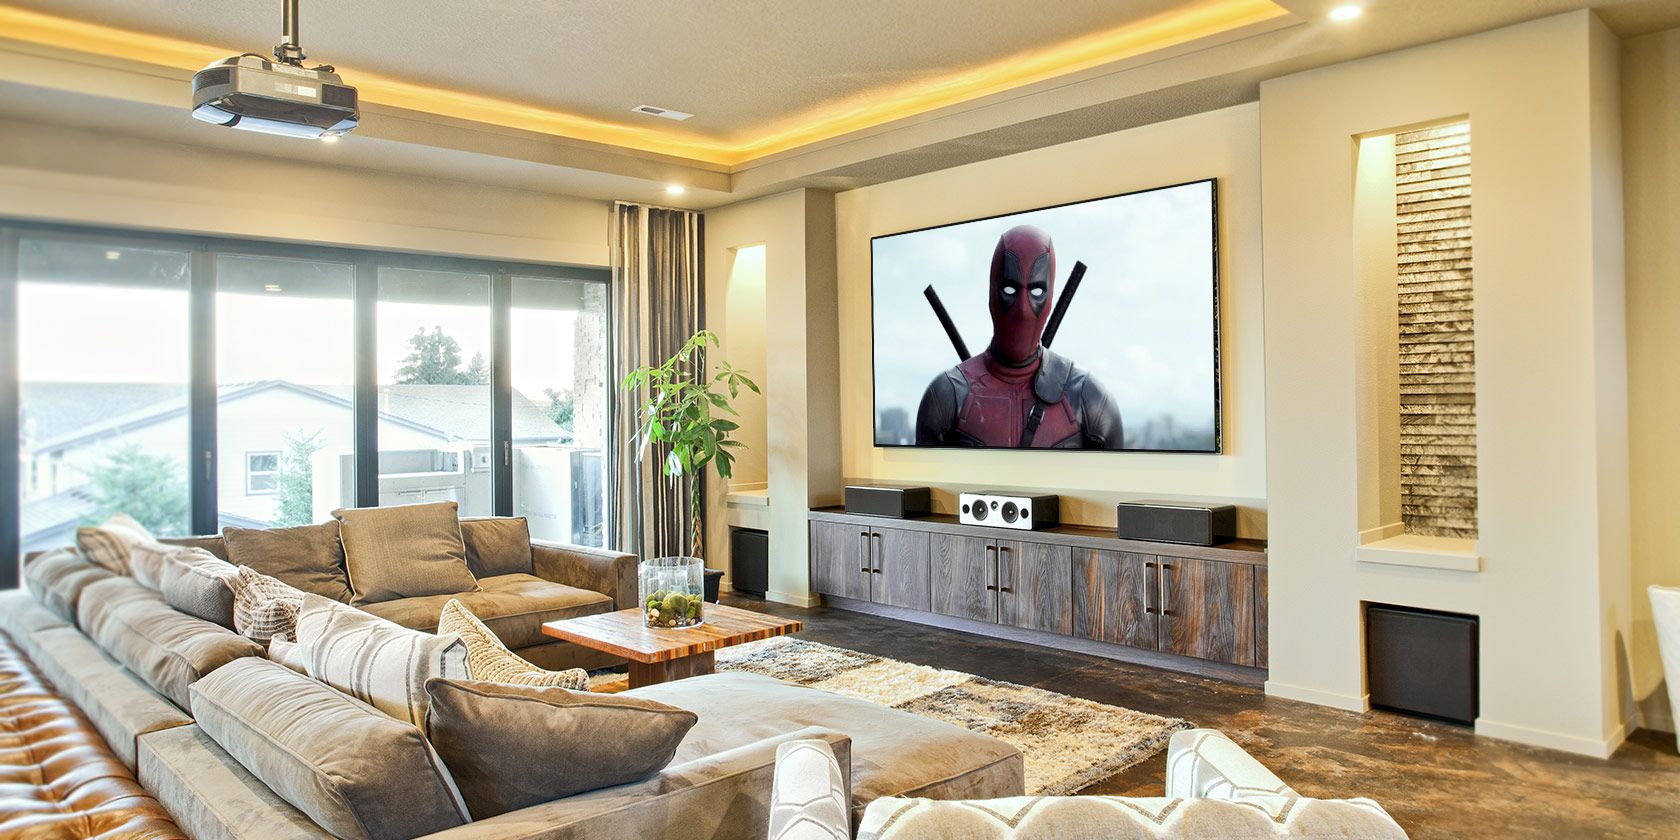 How to build a budget home cinema for under $200